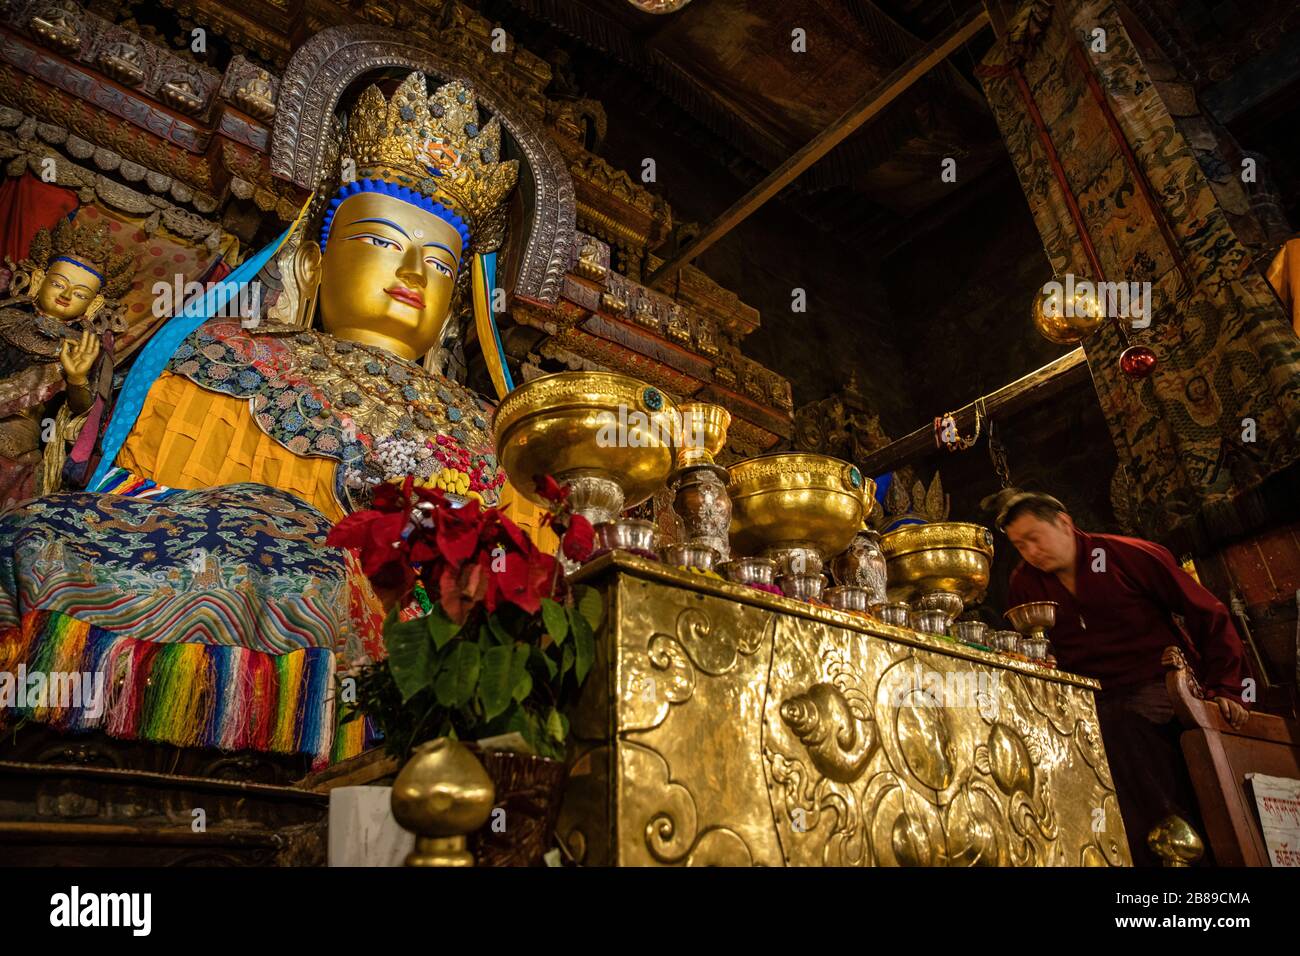 Buddha statues at Pelkor Chode complex of monasteries and temples in Gyangze, Tibet Stock Photo